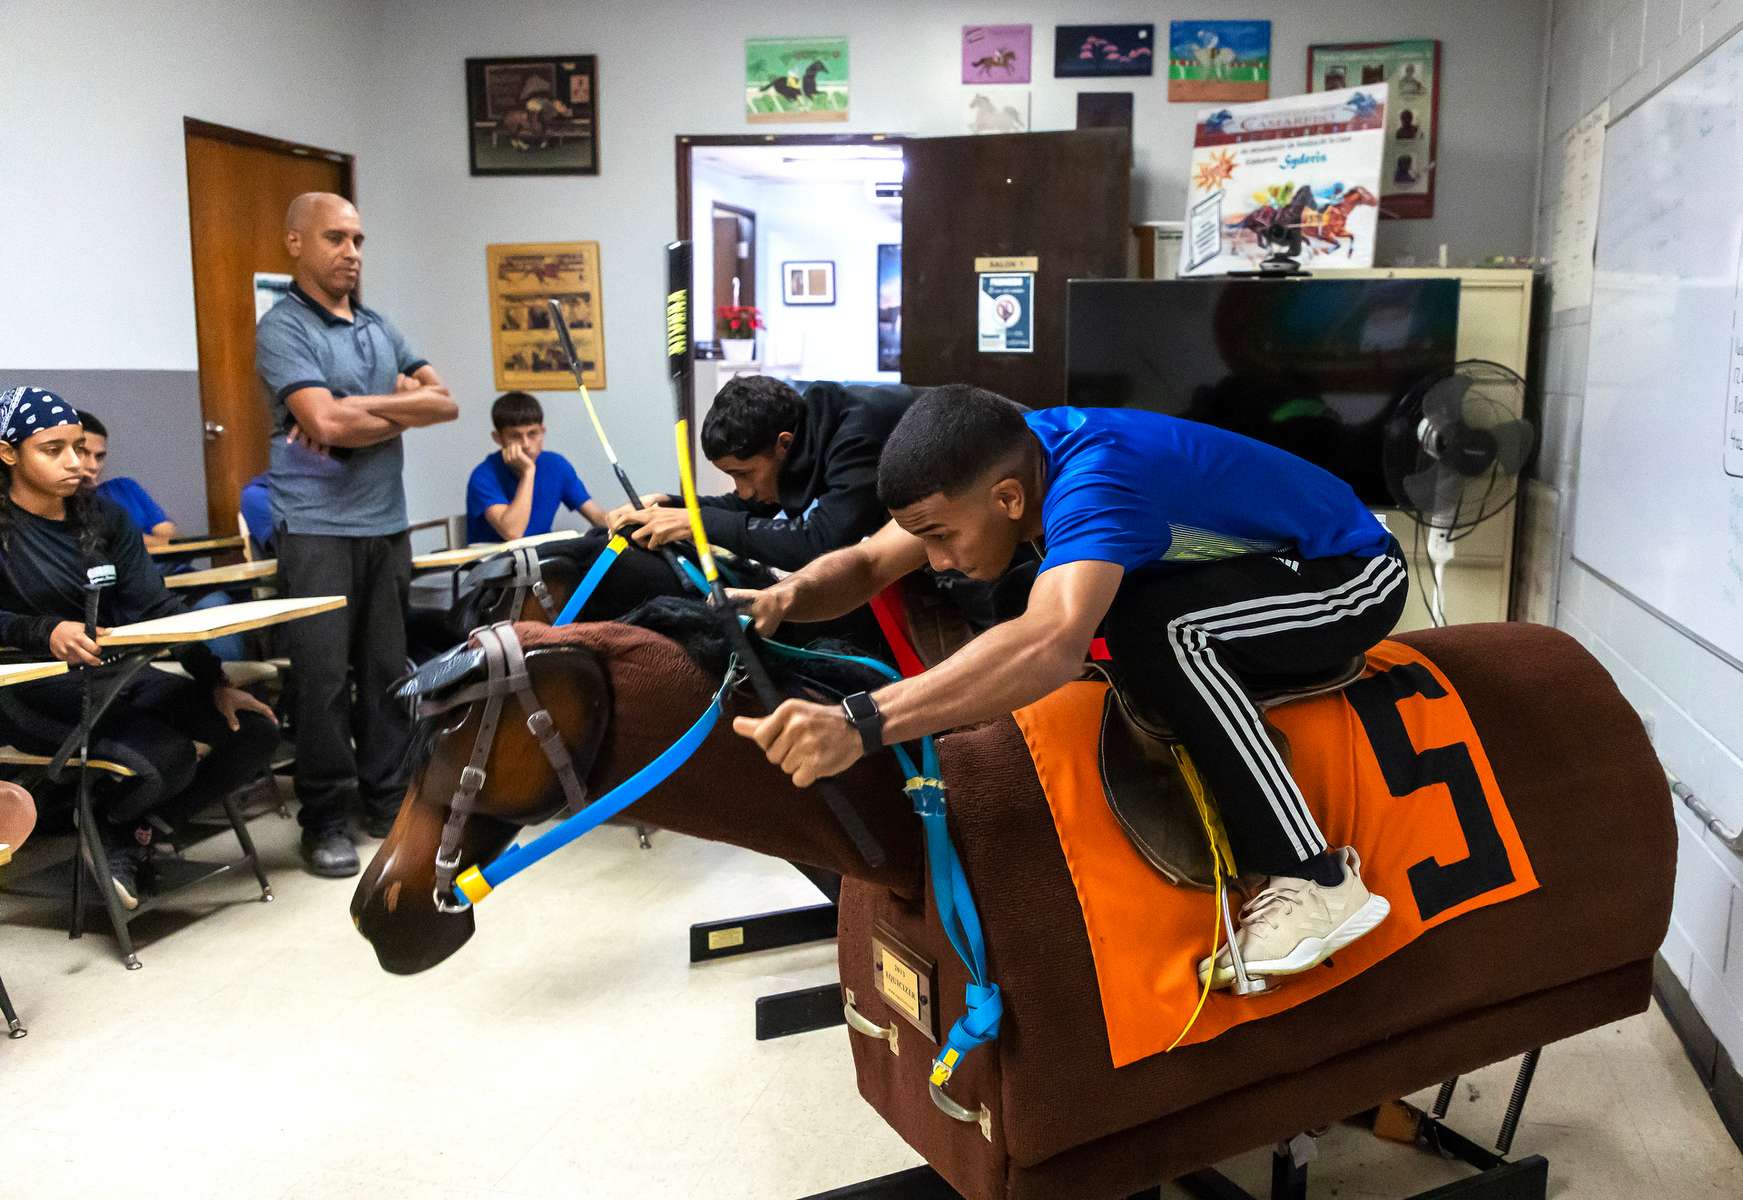 Student Jockeys use a Racehorse Simulator during class taught by Instructor Willie Lozano at the Vocational Equestrian Agustín Mercado Reverón School located in the Hipódromo Camarero on November 15, 2022 in Canovanas, Puerto Rico. The Vocational Equestrian Agustín Mercado Reverón School has produced some of the best jockeys in the world but also prepares students for a wide range of equestrian jobs on a tuition-free basis.  